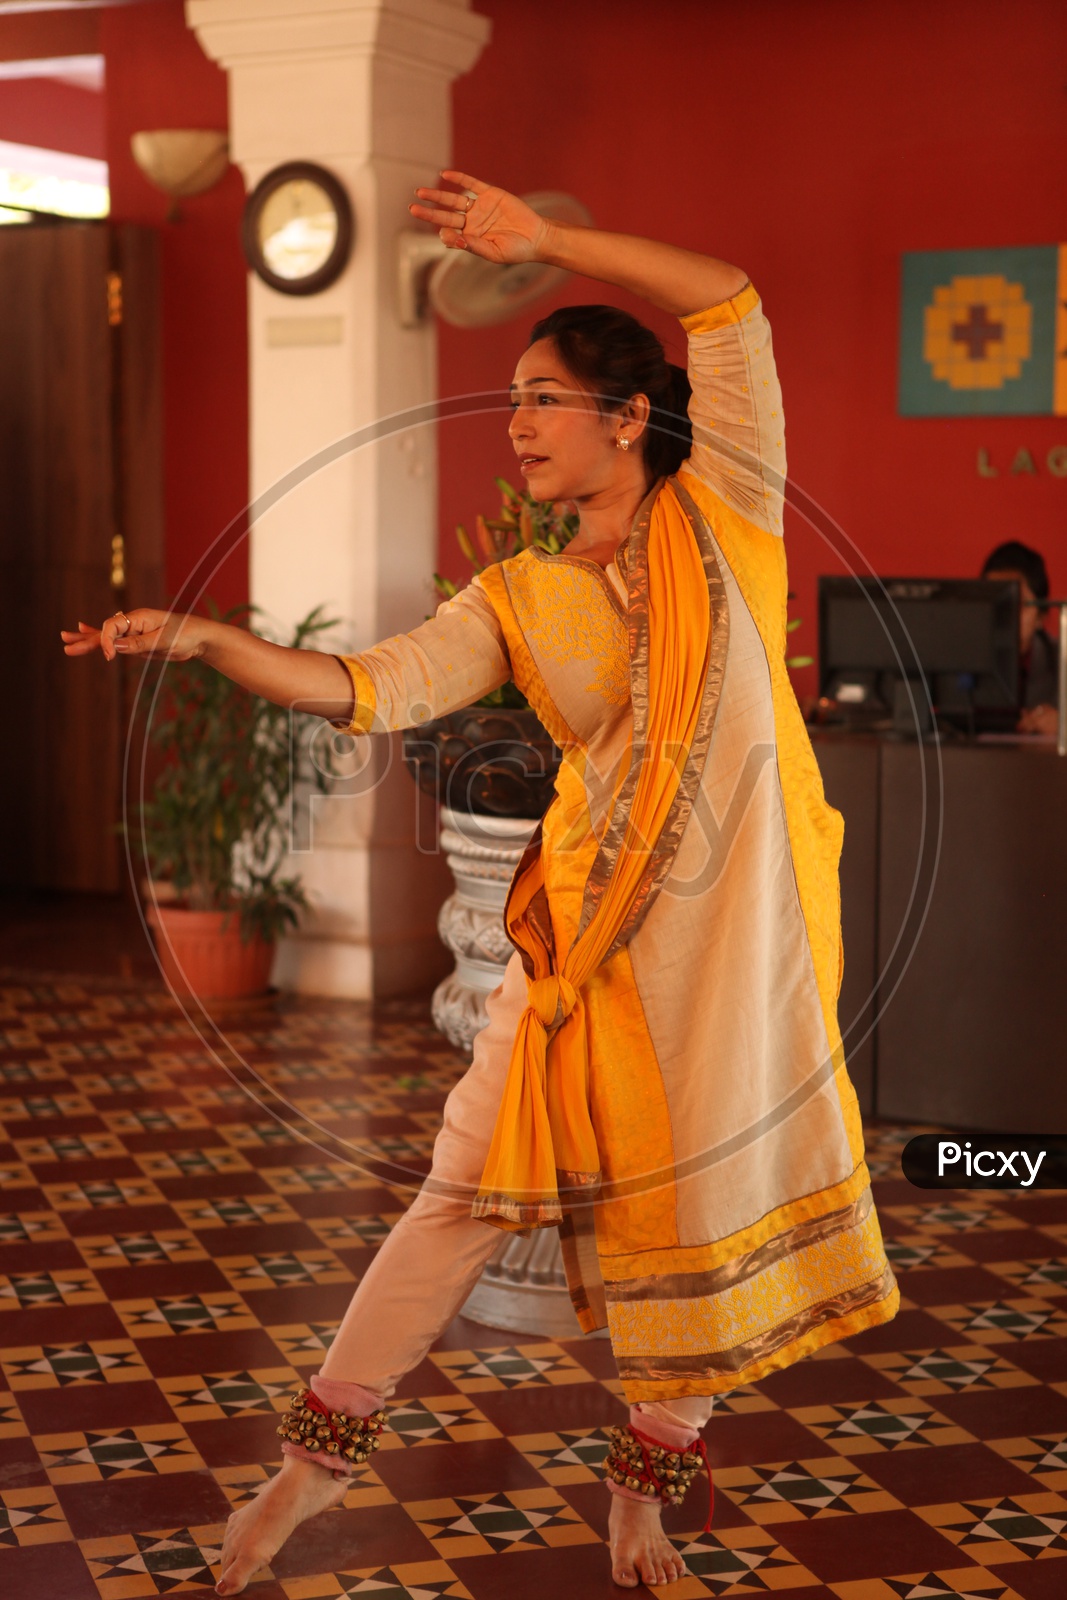 A Young Woman Practise Kathak , A Traditional Dance art Form In India